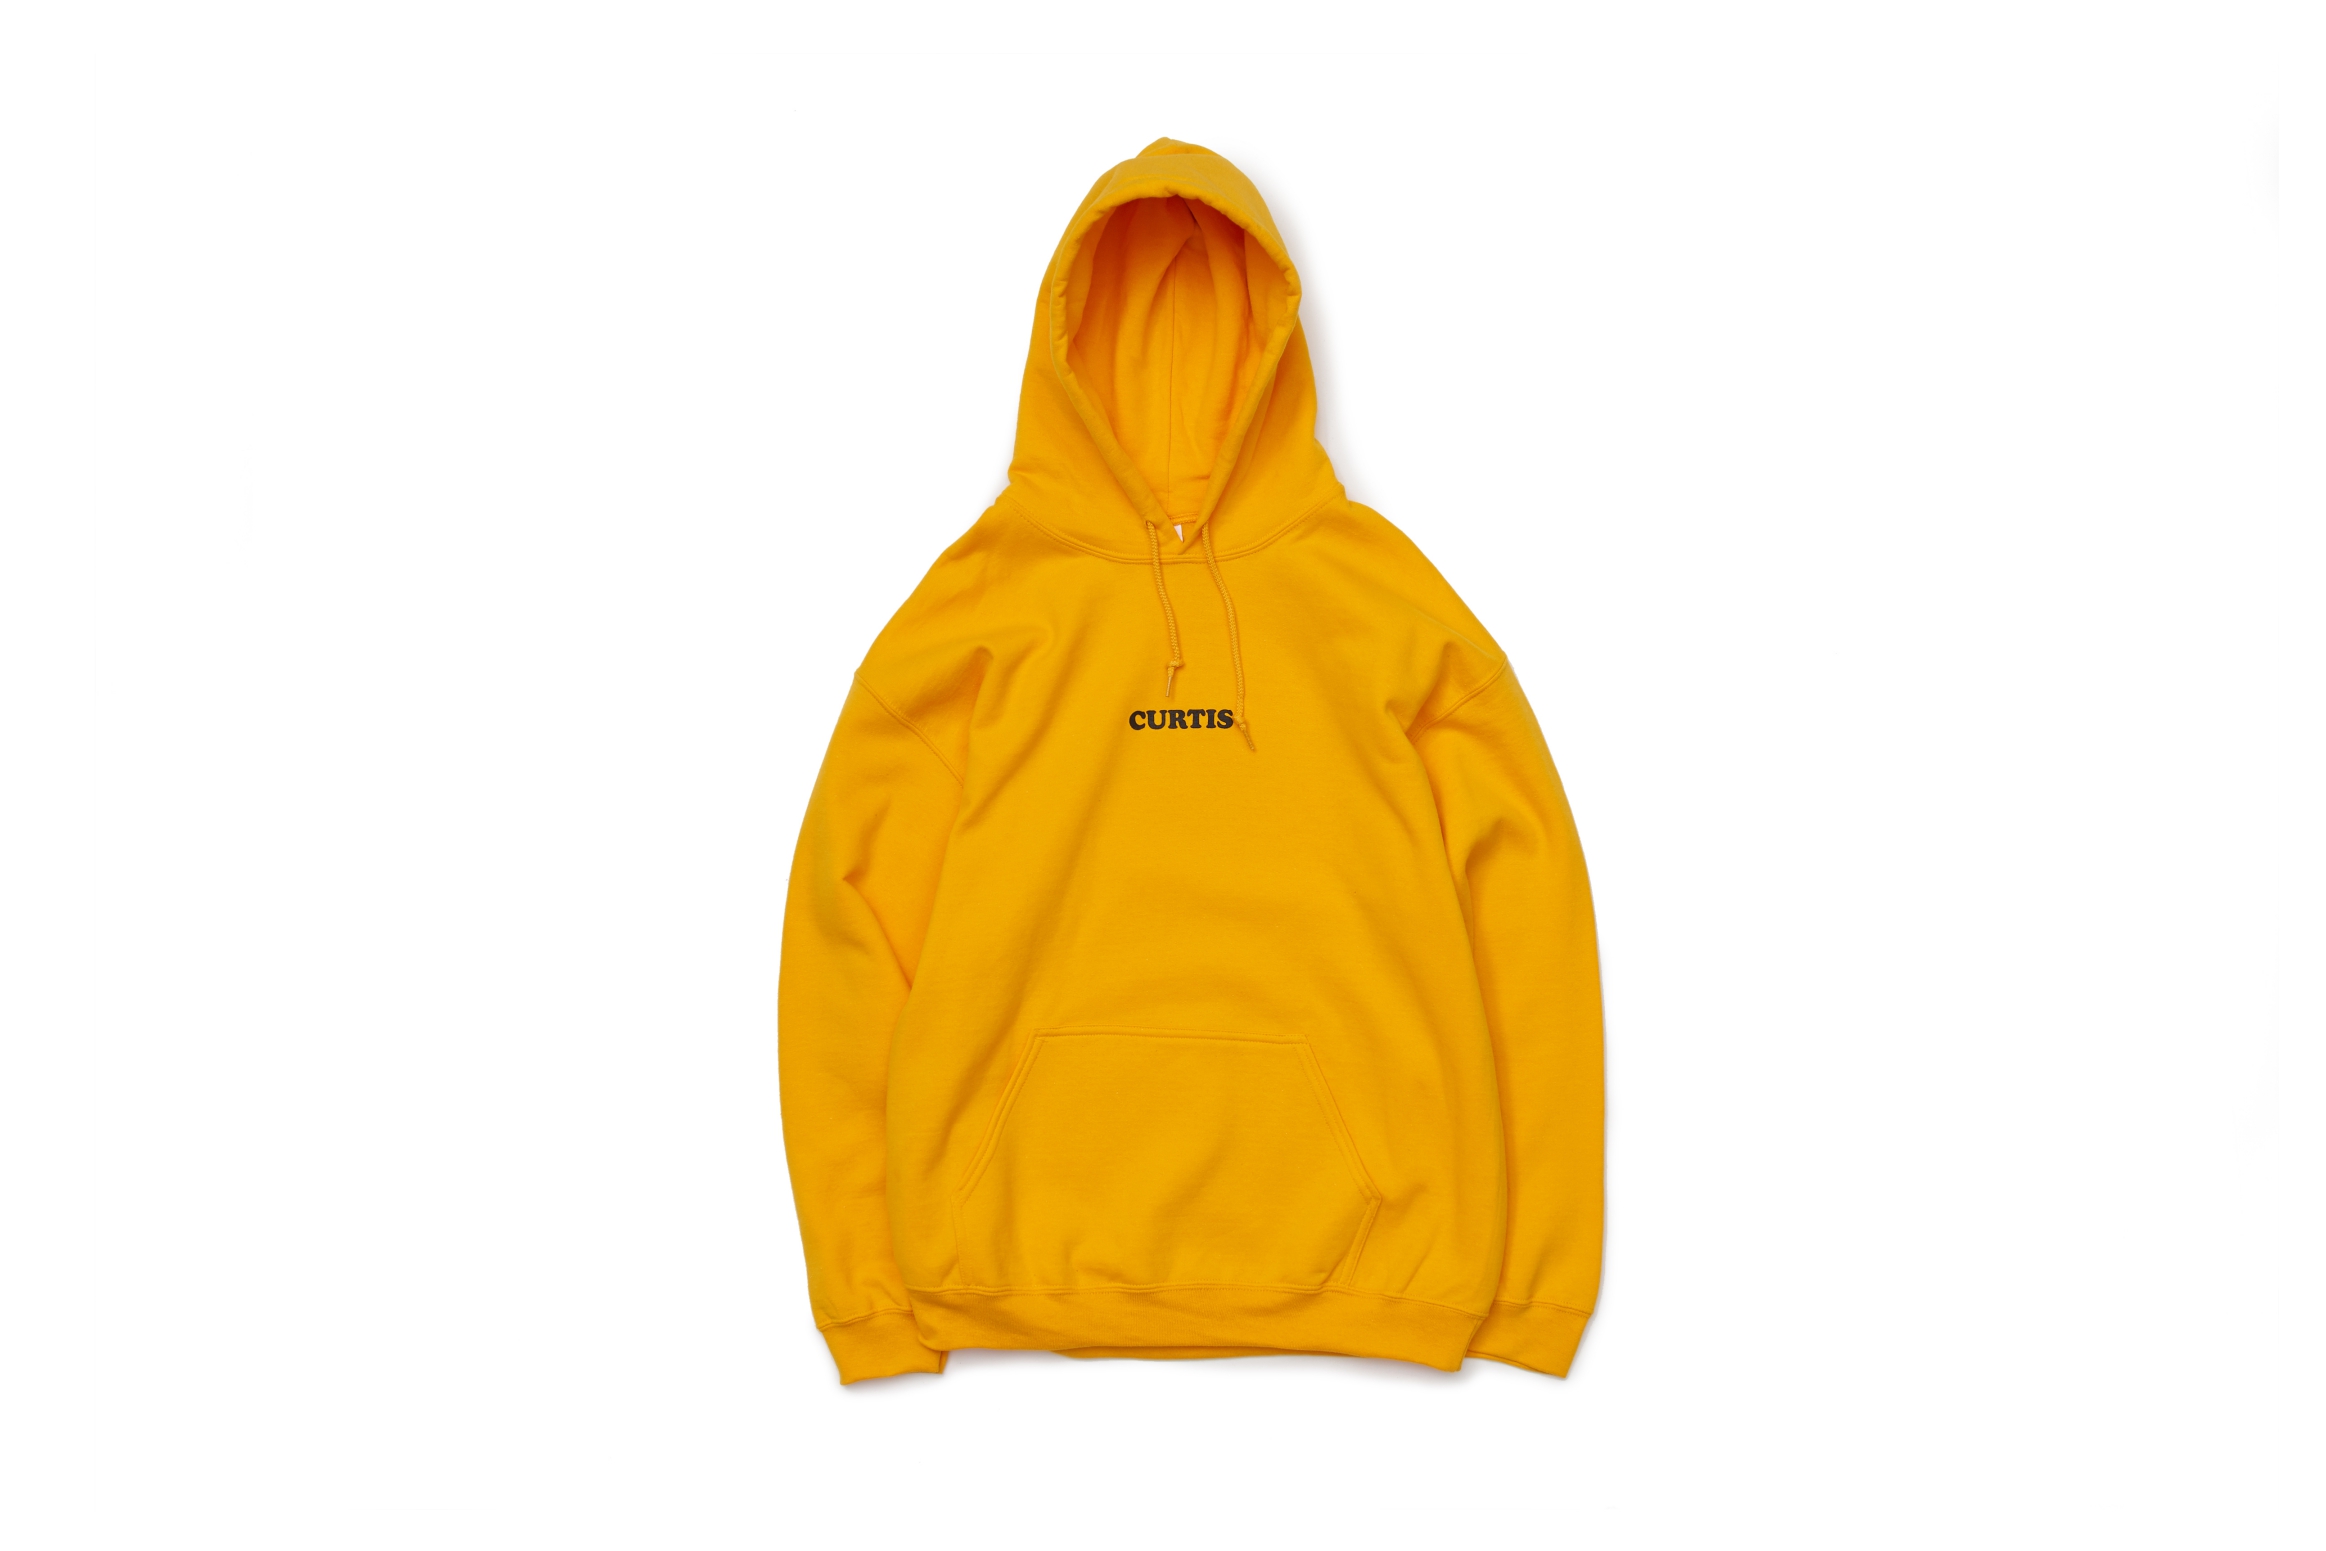 CURTIS HOODIE - YELLOW